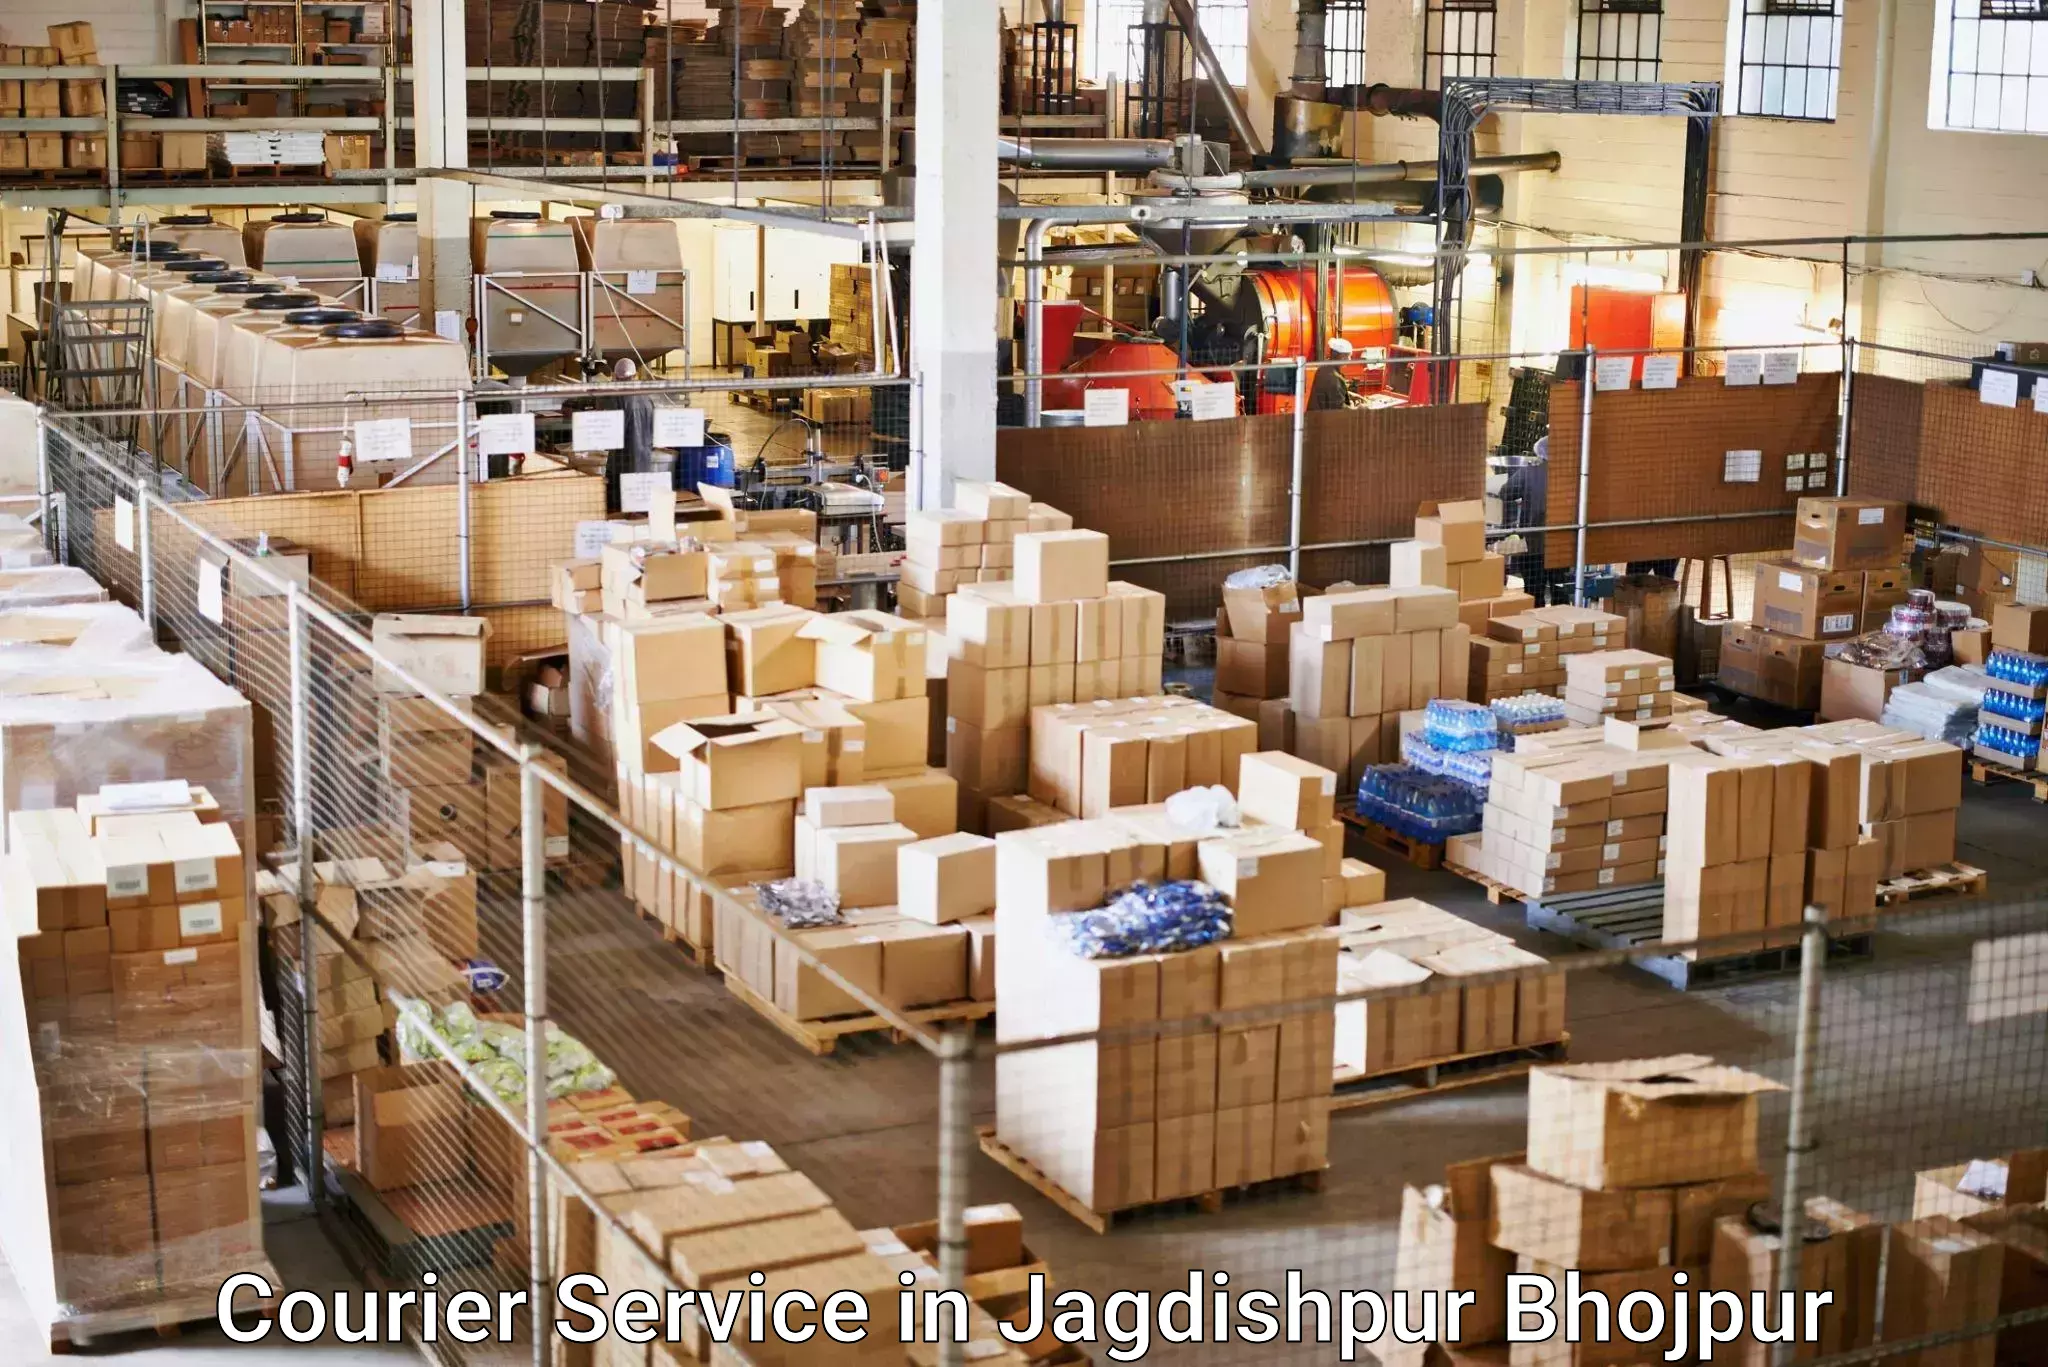 Parcel handling and care in Jagdishpur Bhojpur